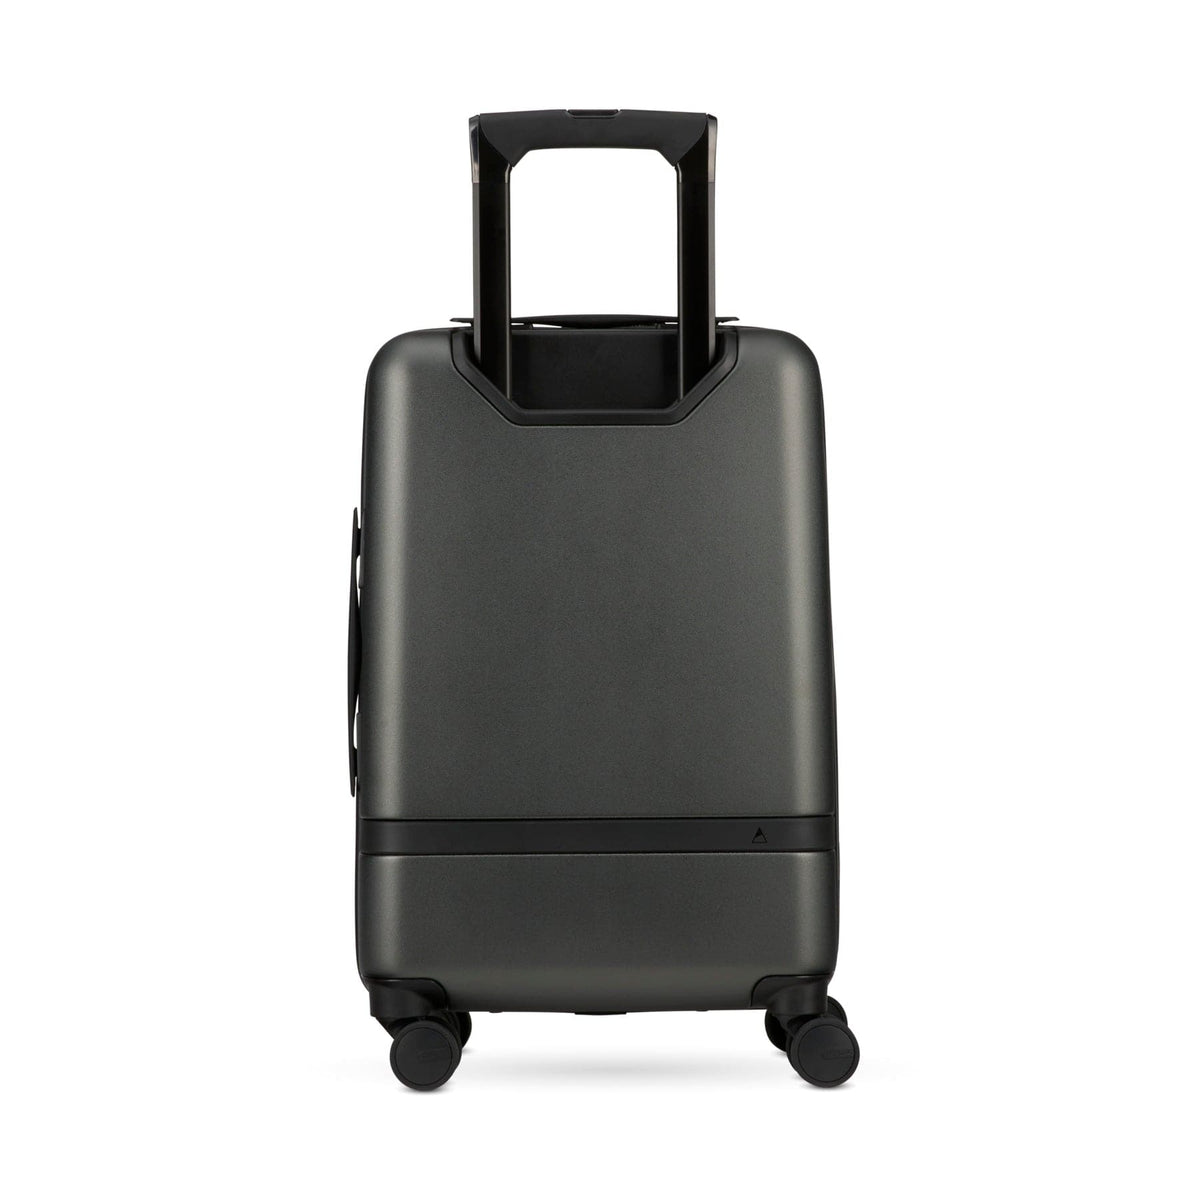 Nomatic Carry-On Classic Luggage